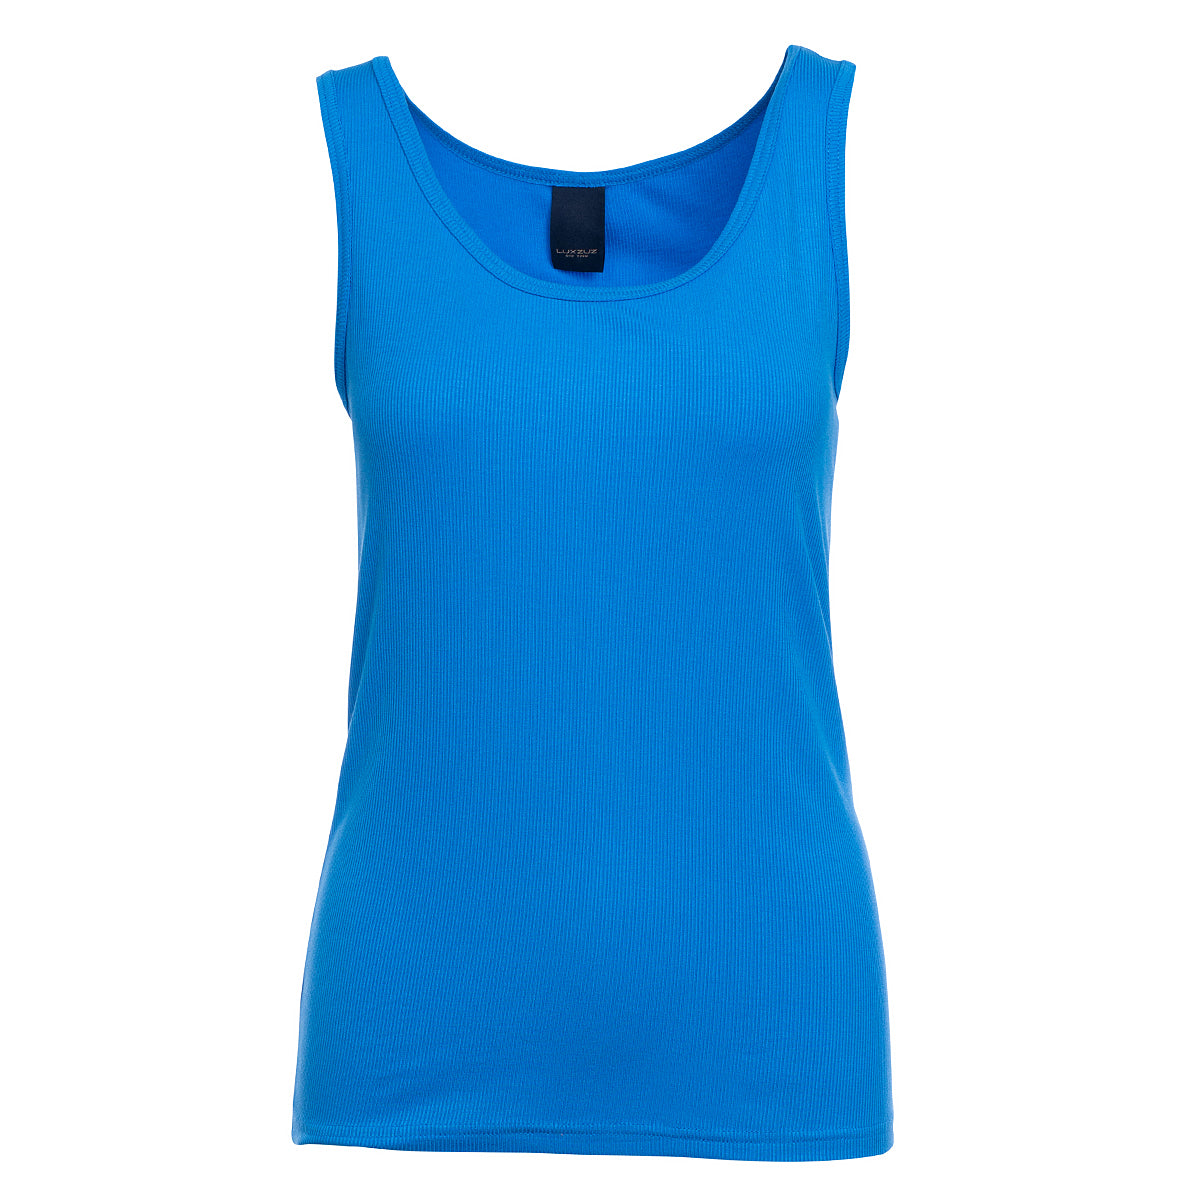 LUXZUZ // ONE TWO Adelina Top Top 567 Brilliant Blue